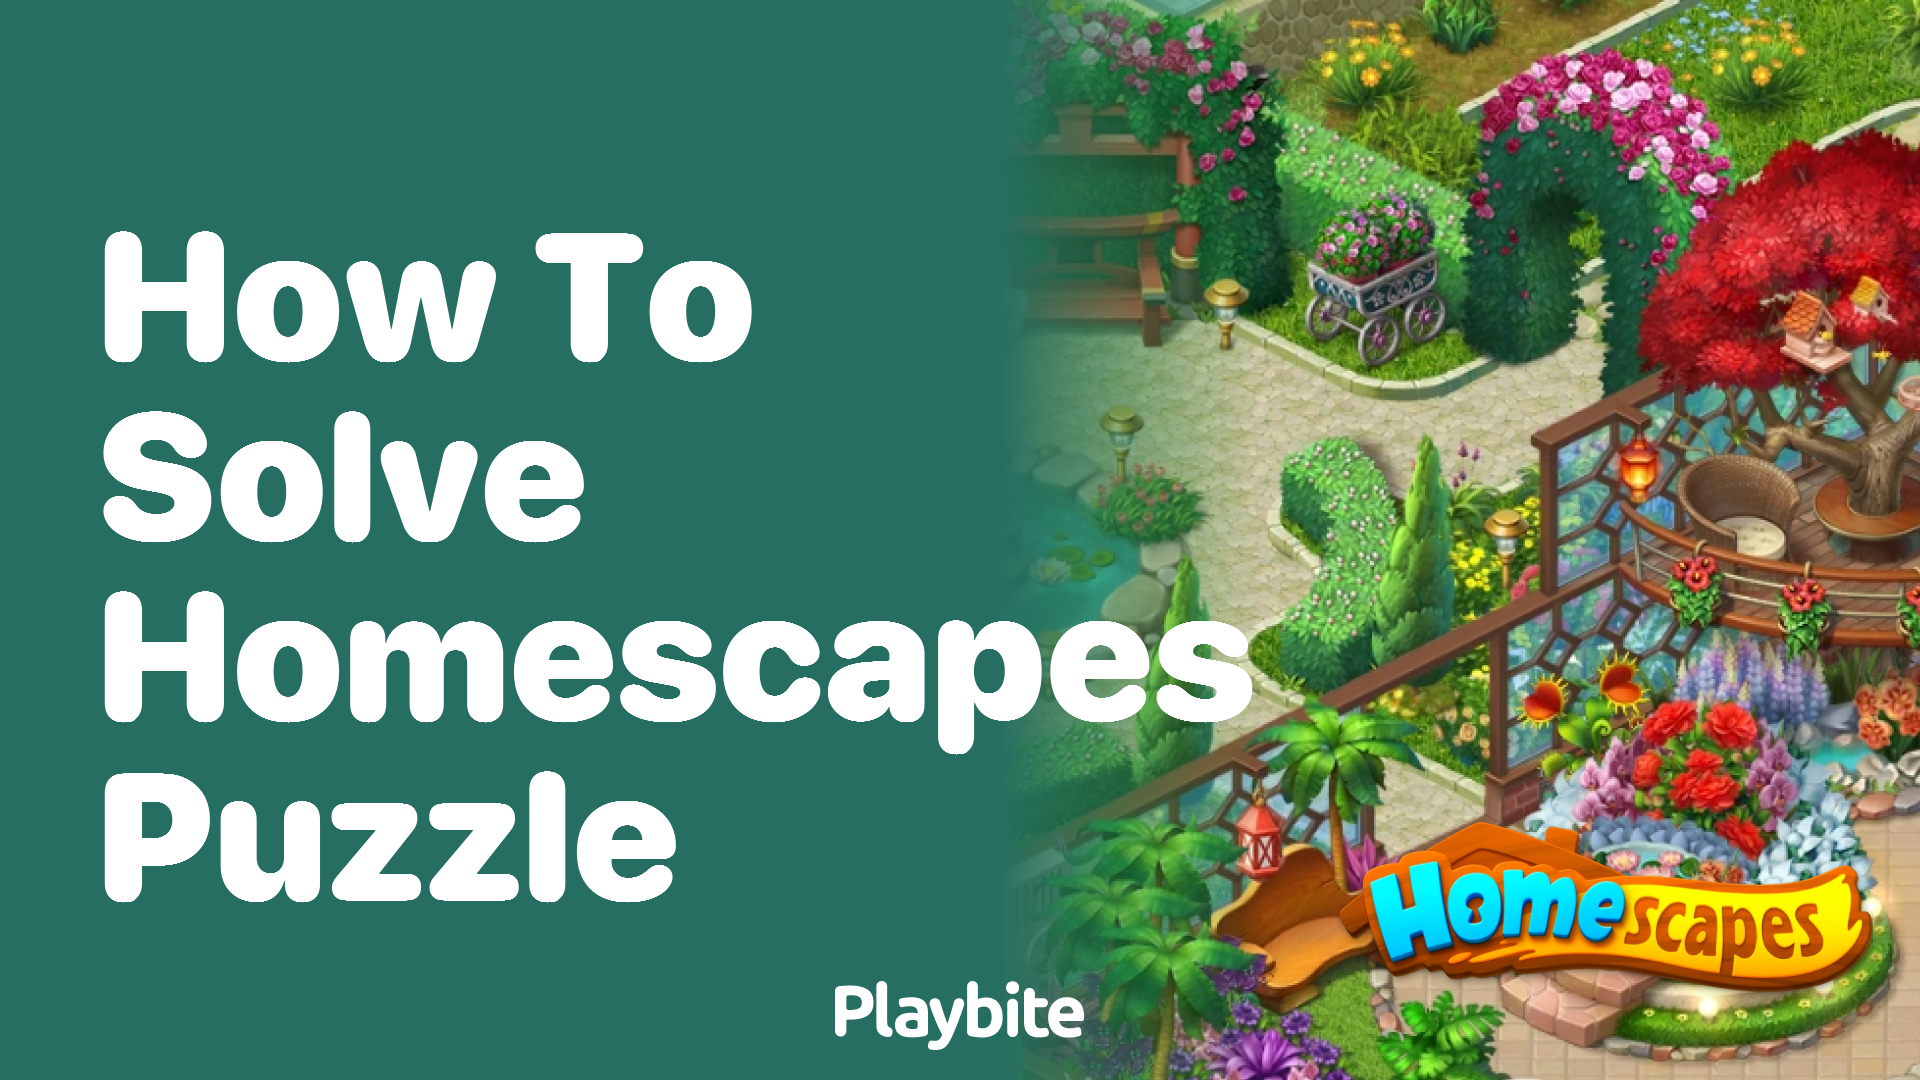 How to solve Homescapes puzzles